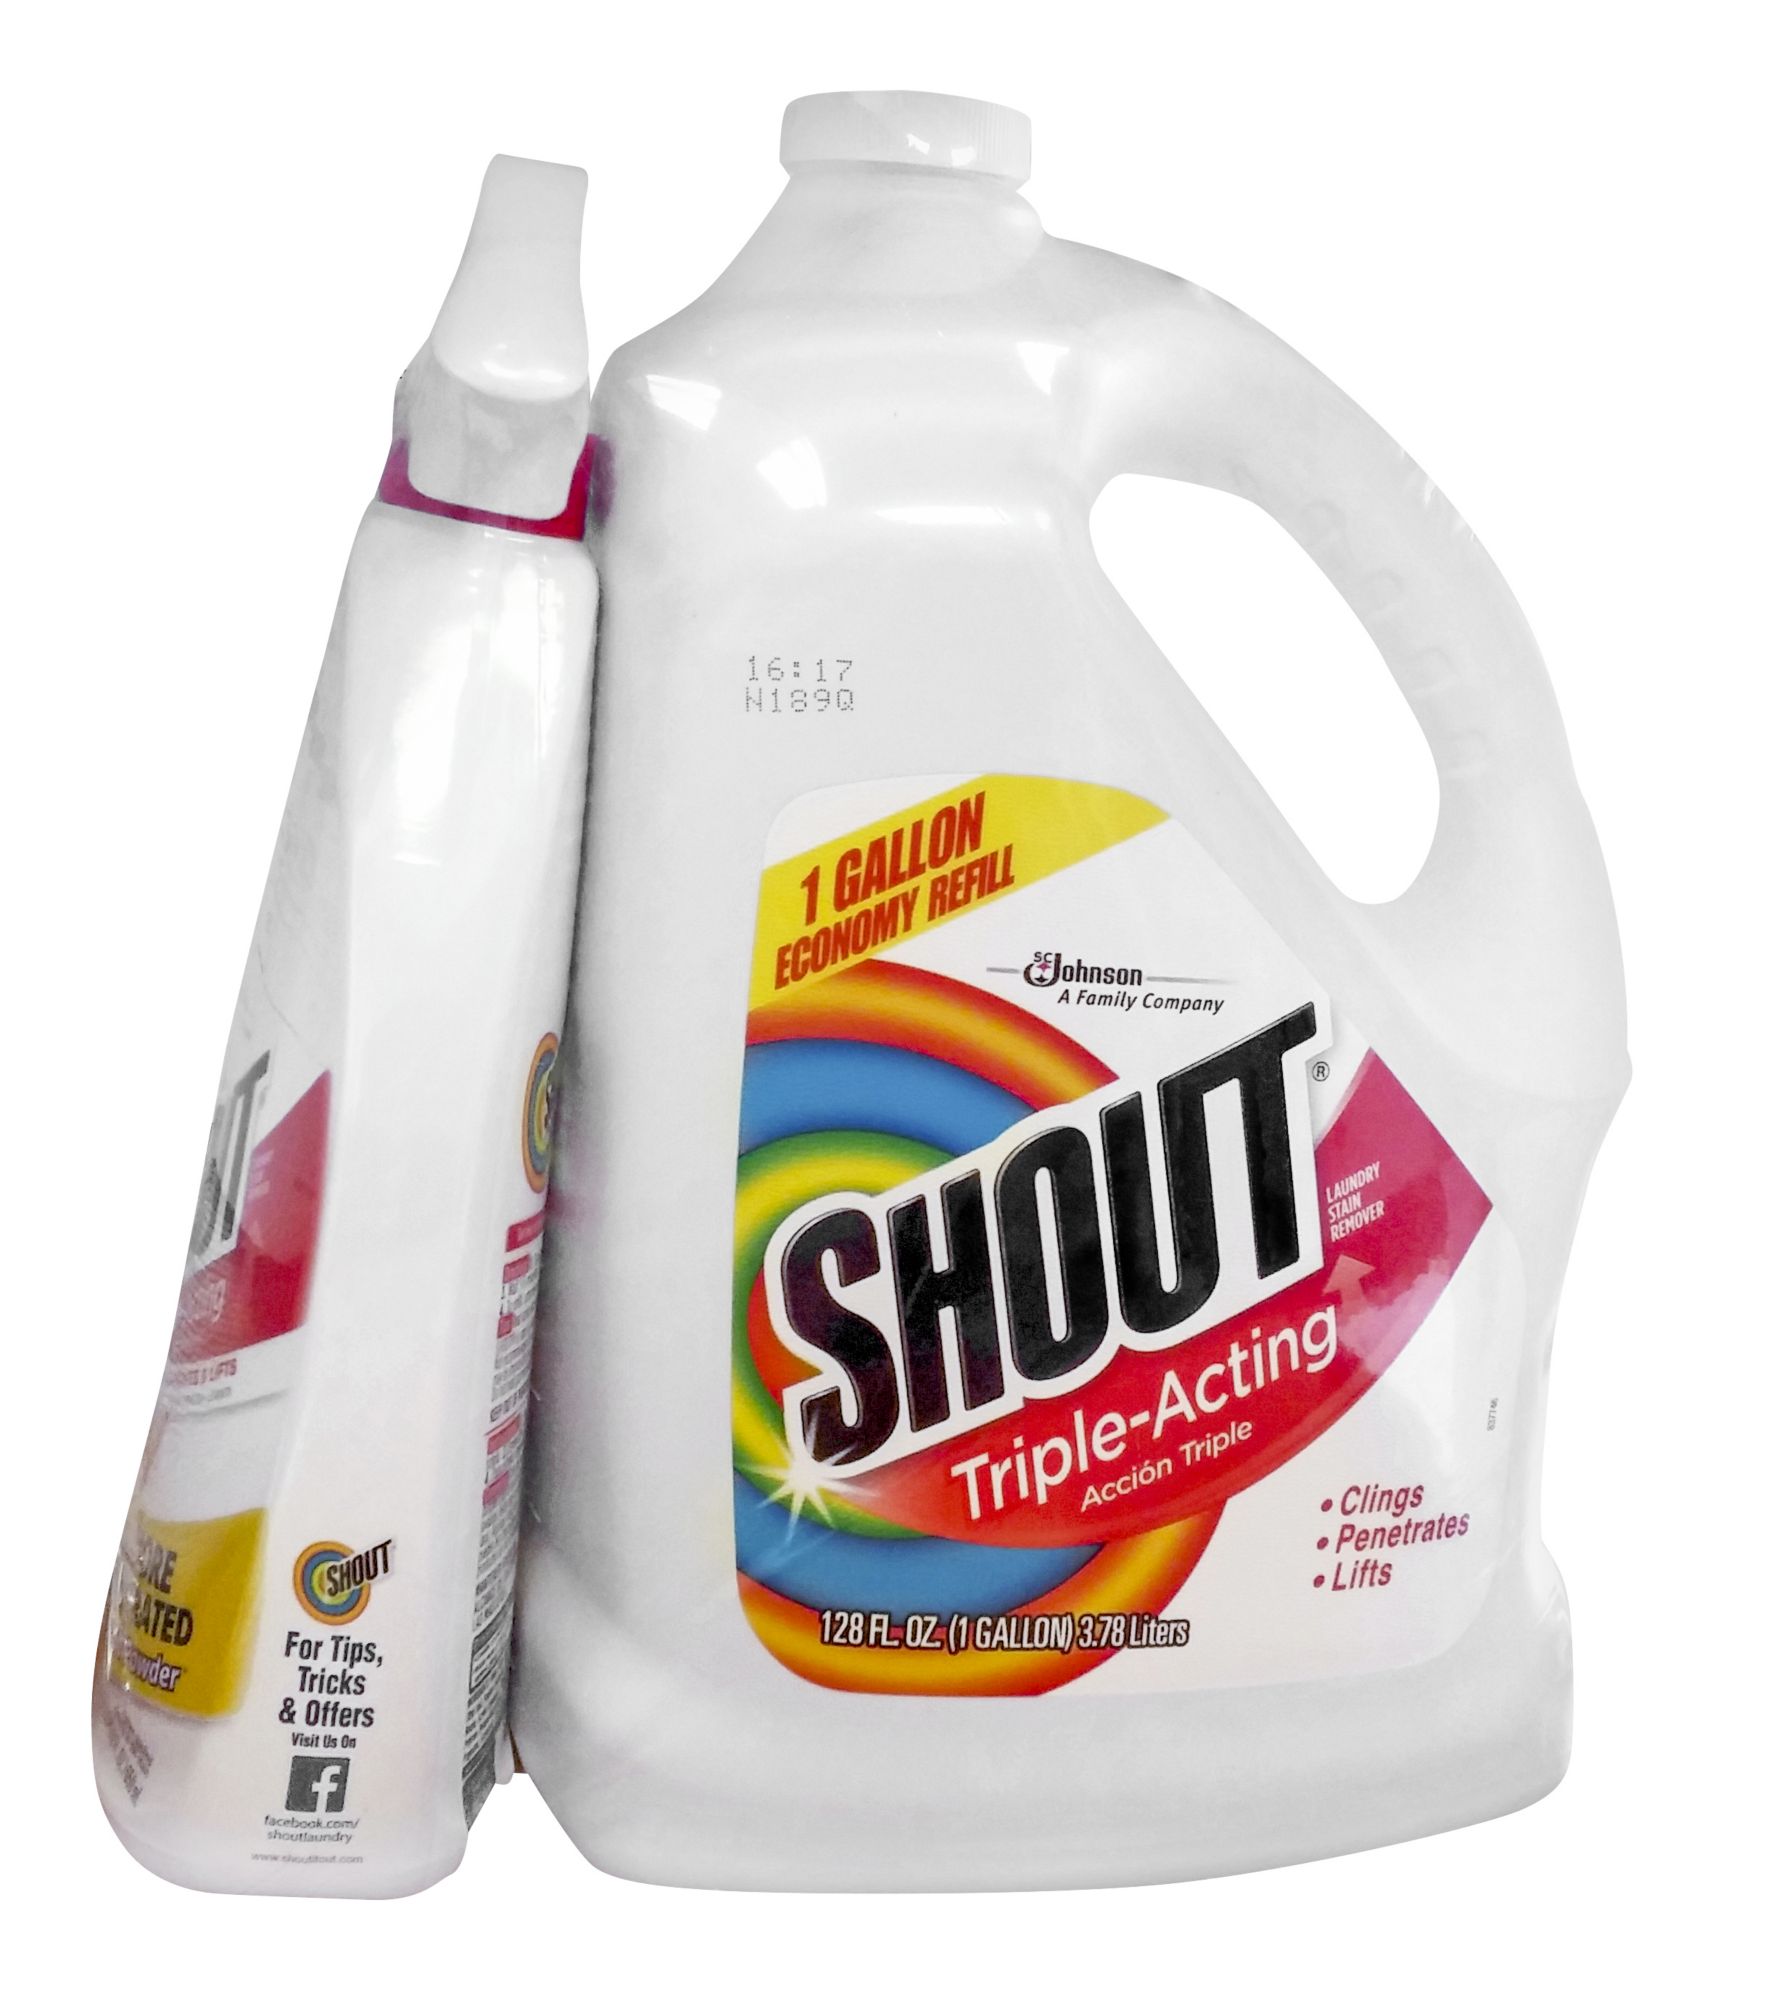 shout bjs stain remover spray